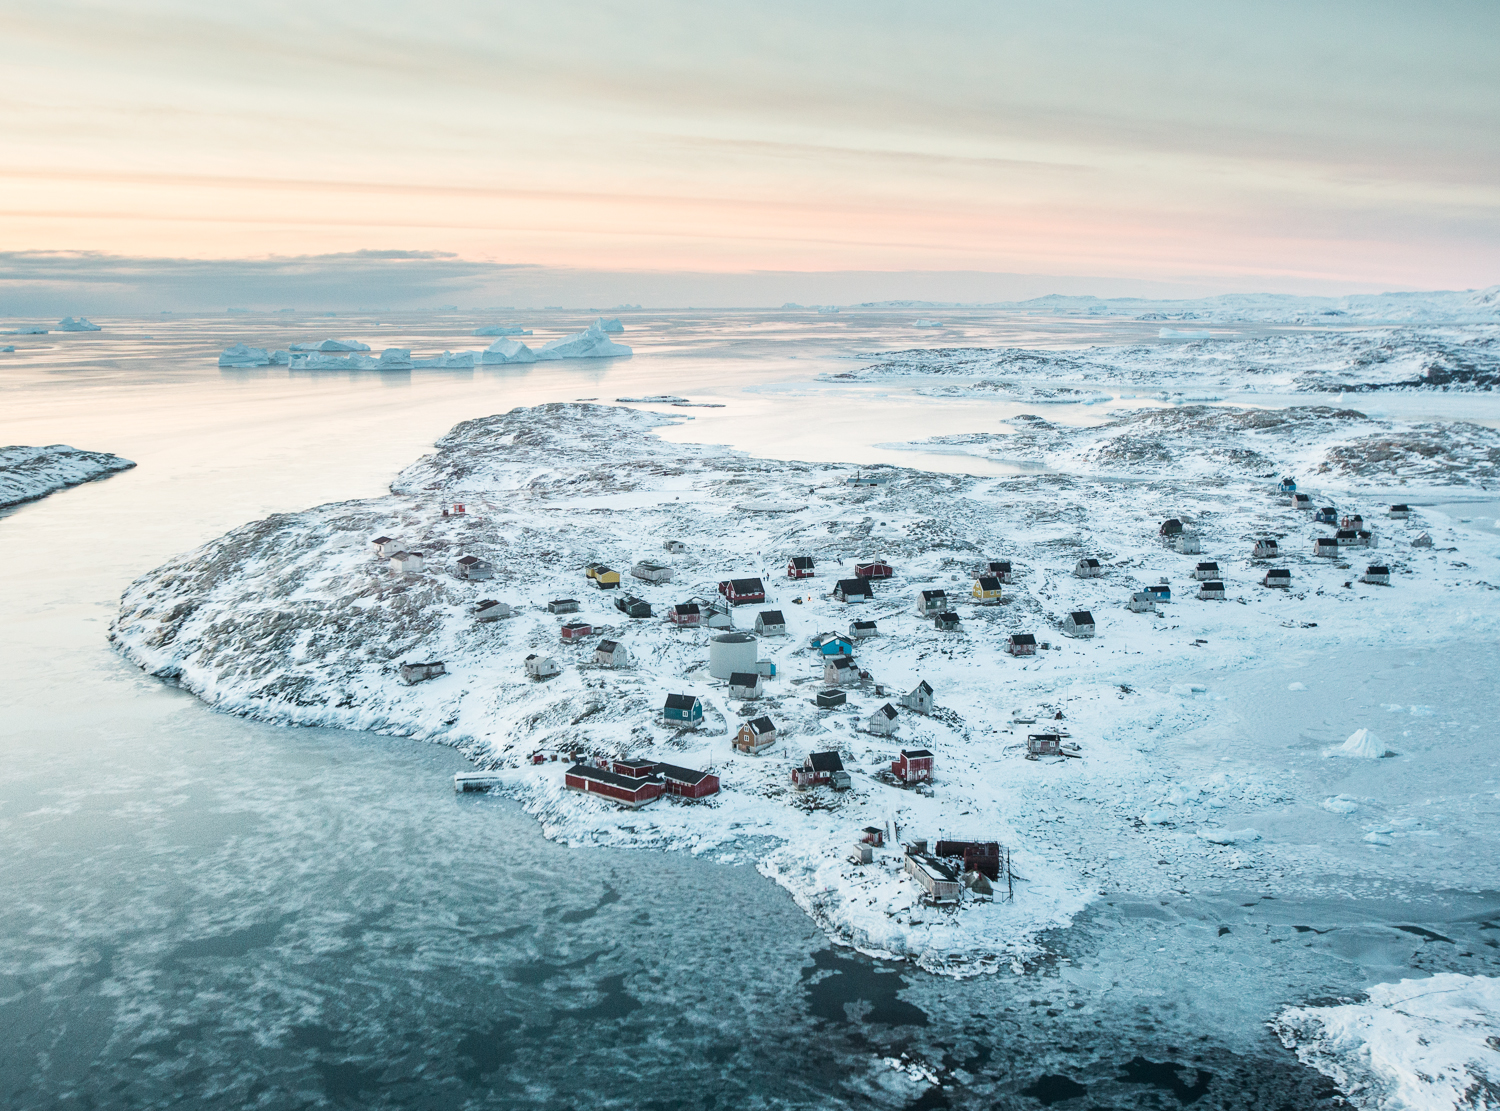 A view from the helicopter while flying over the pack ice from Tasiilaq to Isortoq—population 64—in eastern Greenland.